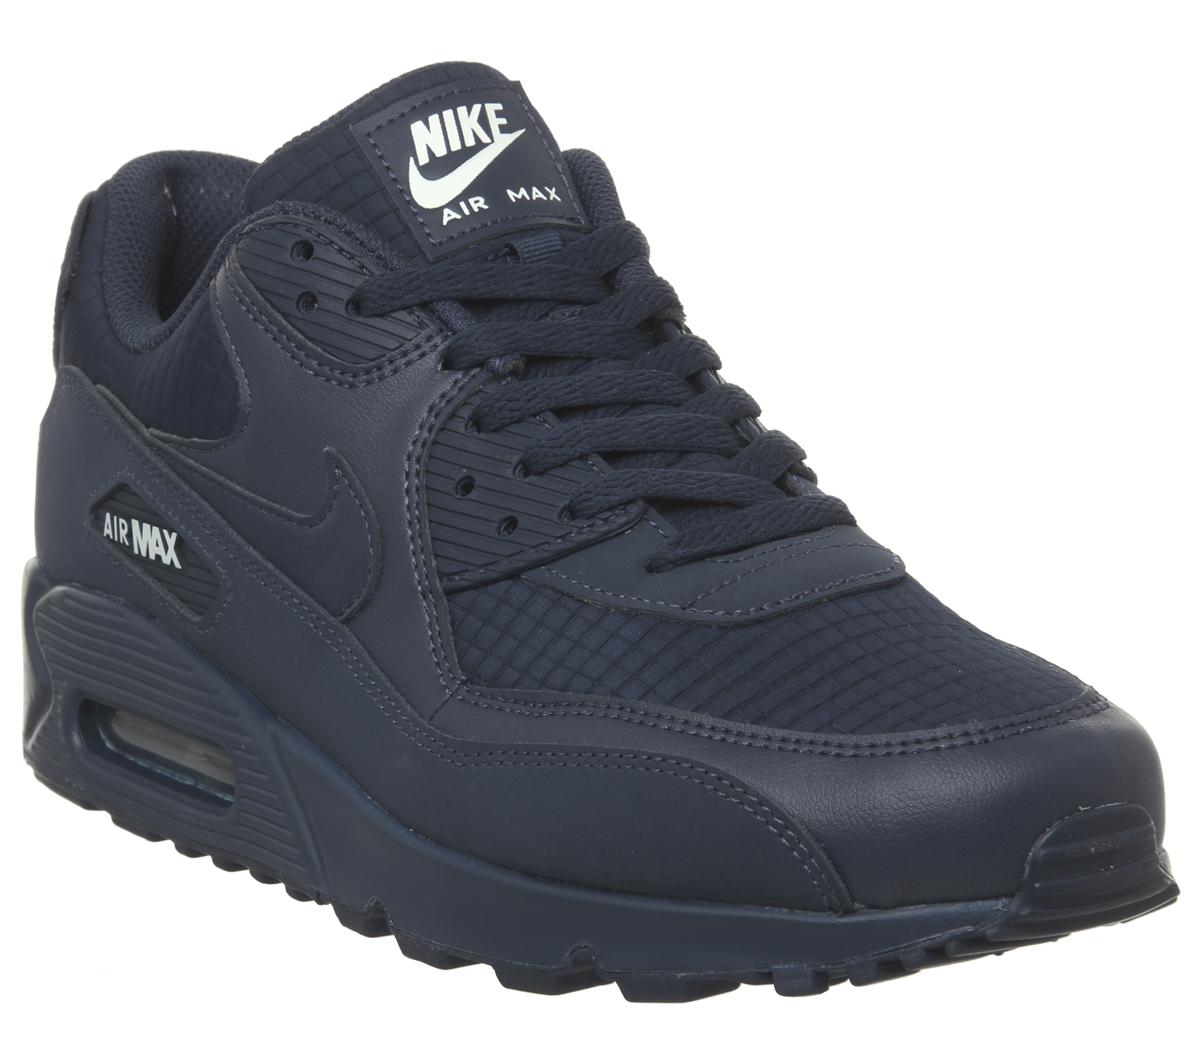 Nike Air Max 90 Trainers Midnight Navy White - Nike 90